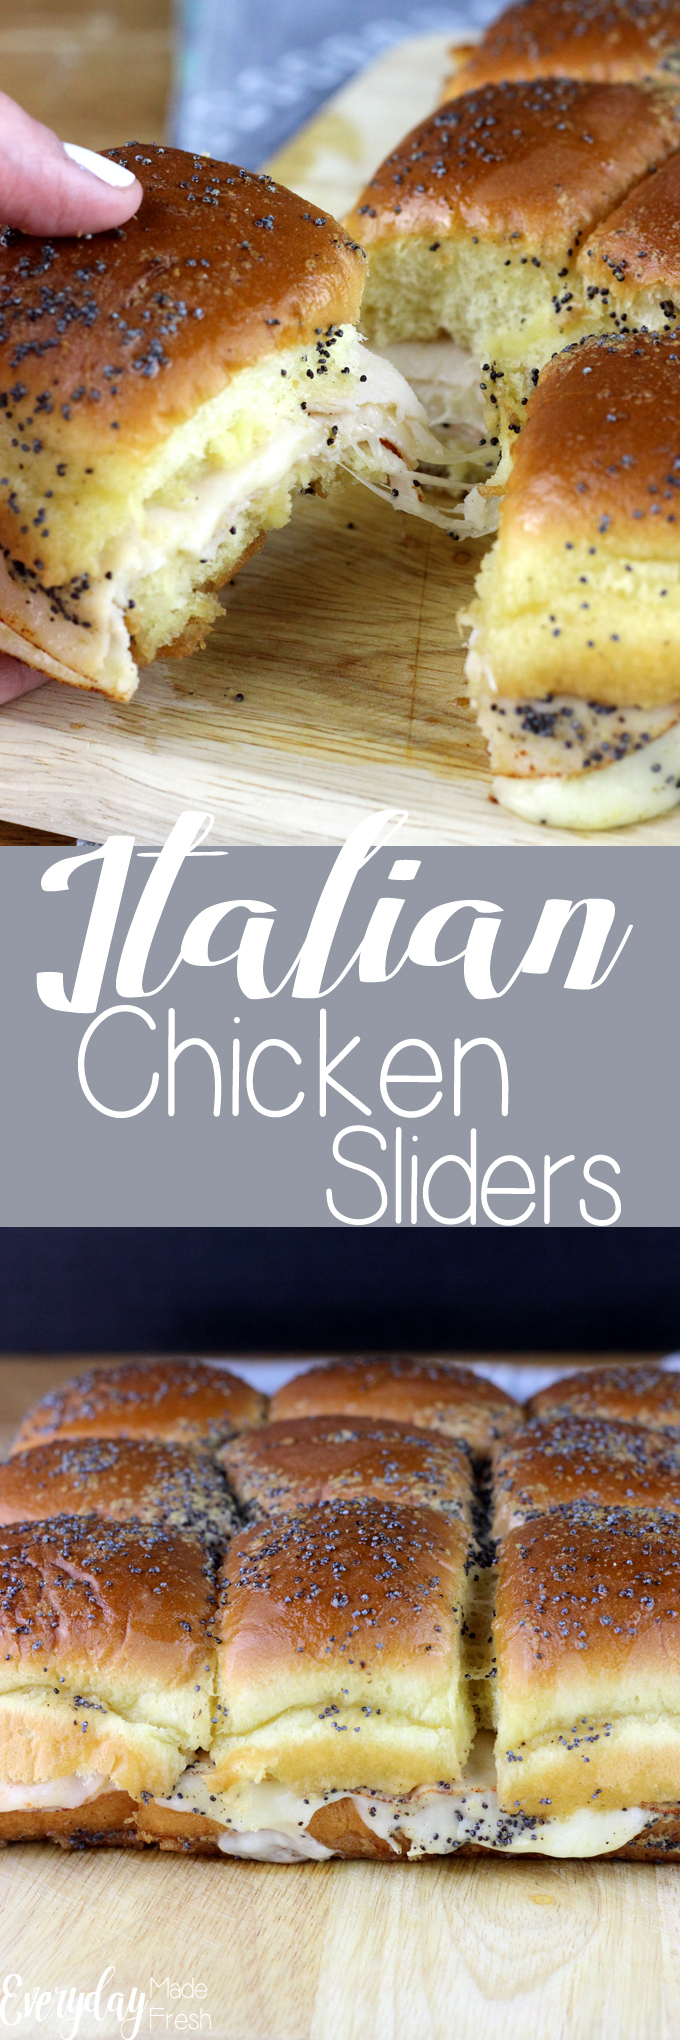 If you need to feed a crowd, these Italian Chicken Sliders are the answer. They are warm, gooey, cheesy, and loaded with flavor! | EverydayMadeFresh.com